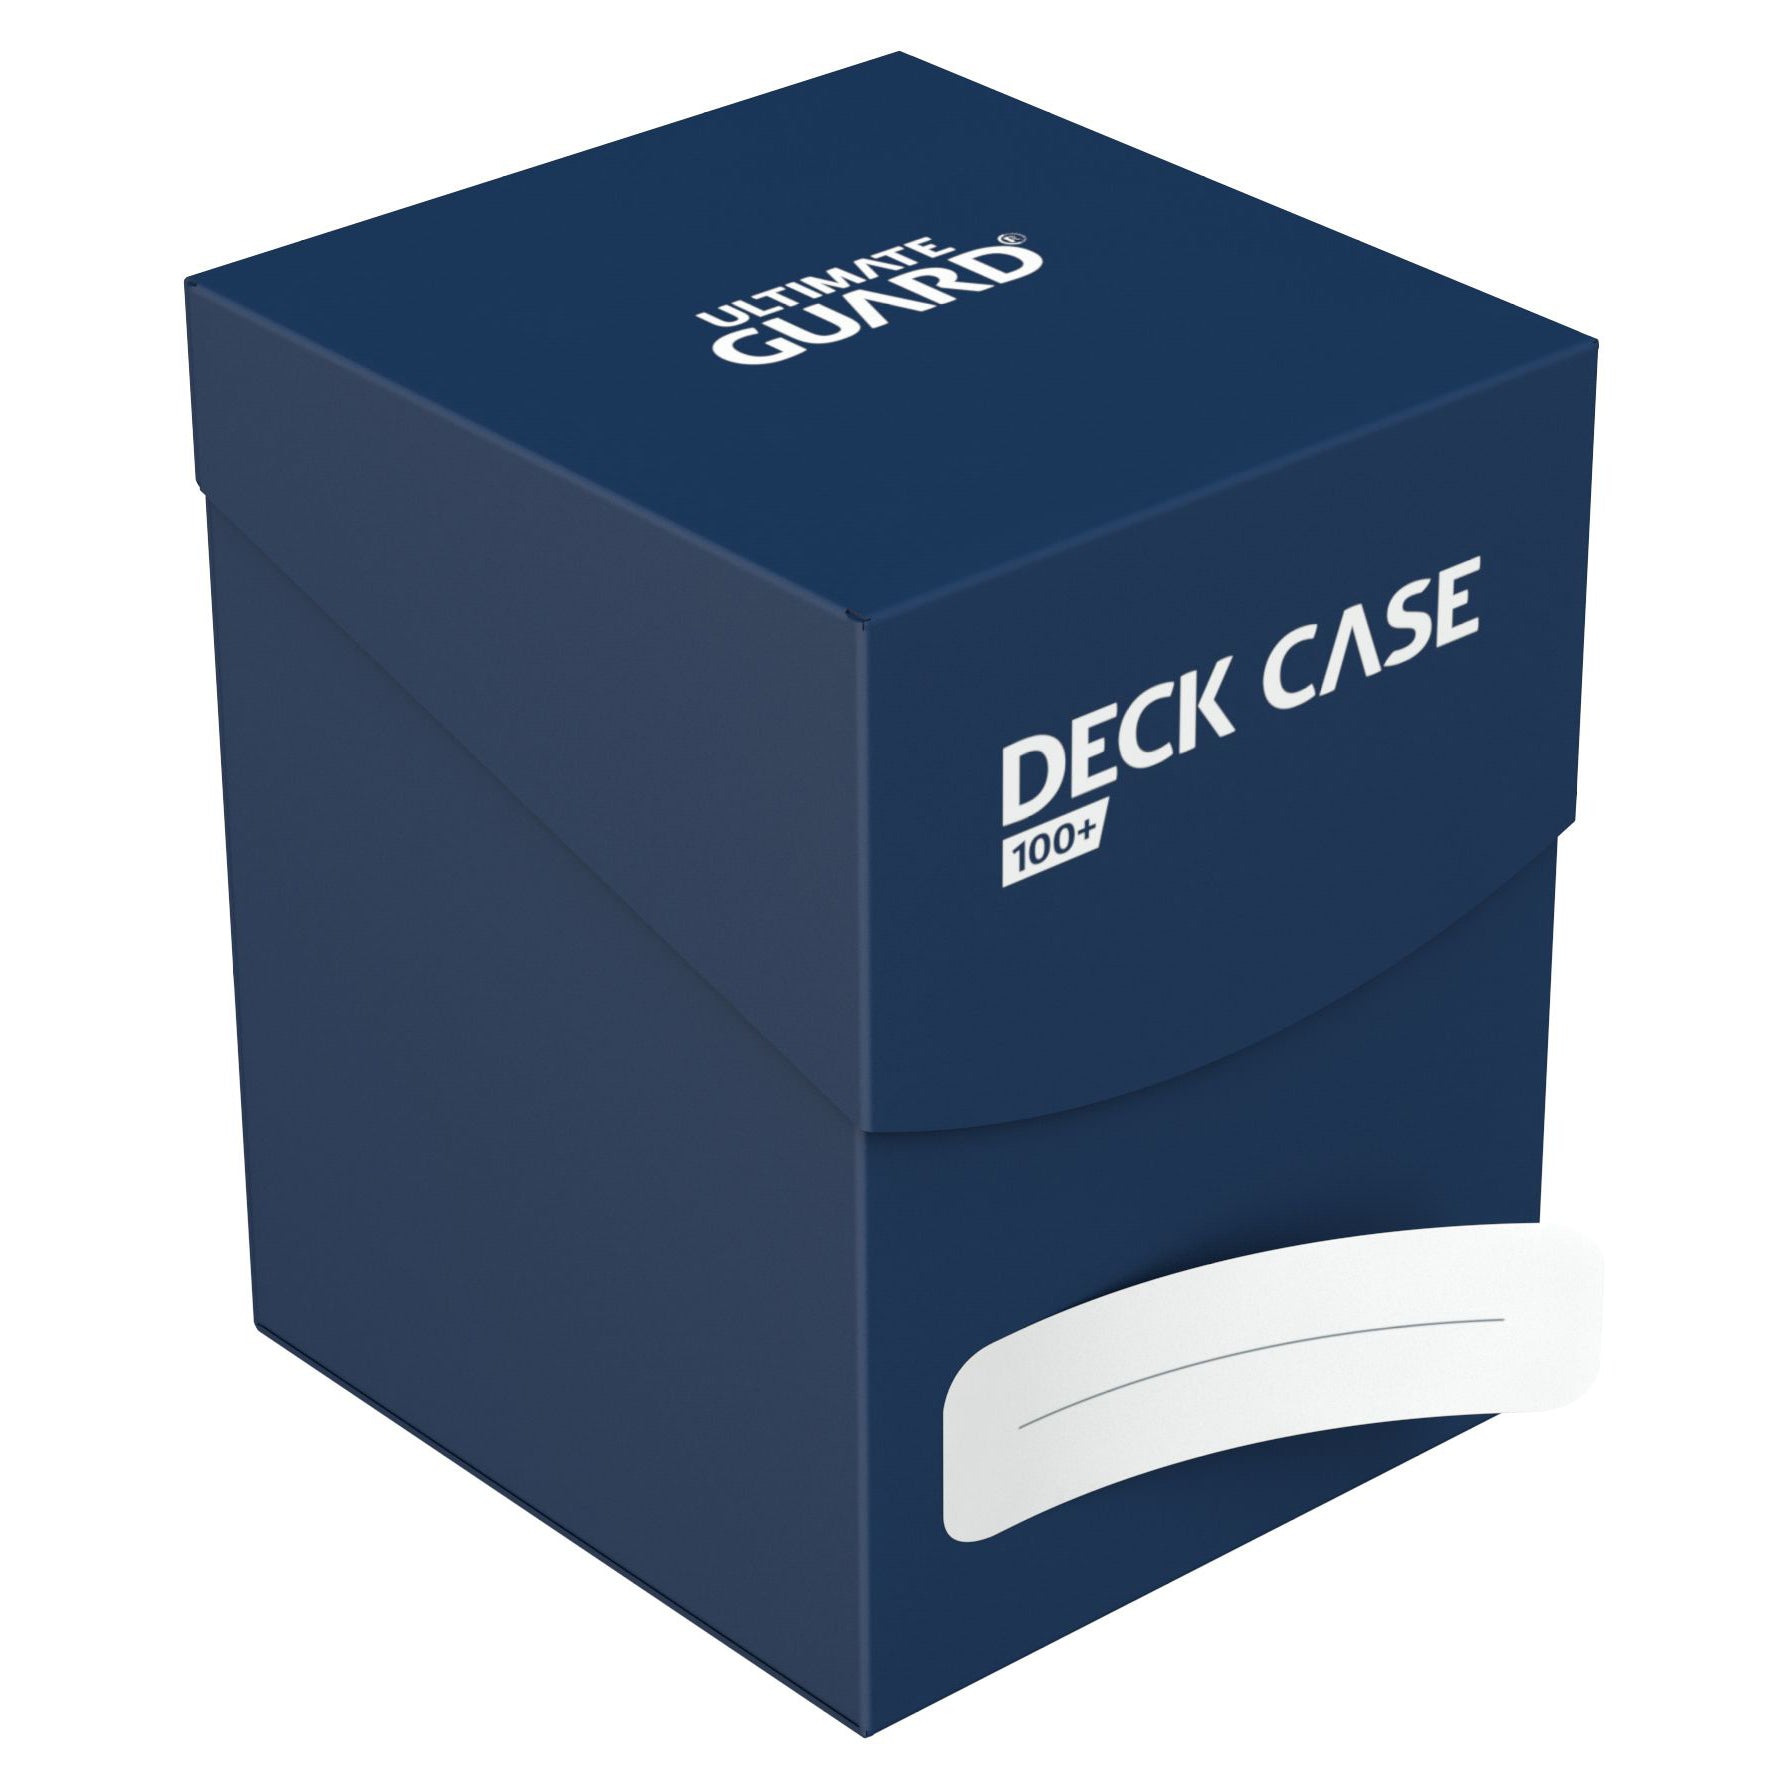 Ultimate Guard 80+ Deck Case holds 100 double-sleeved or 120 single-sleeved standard sized cards